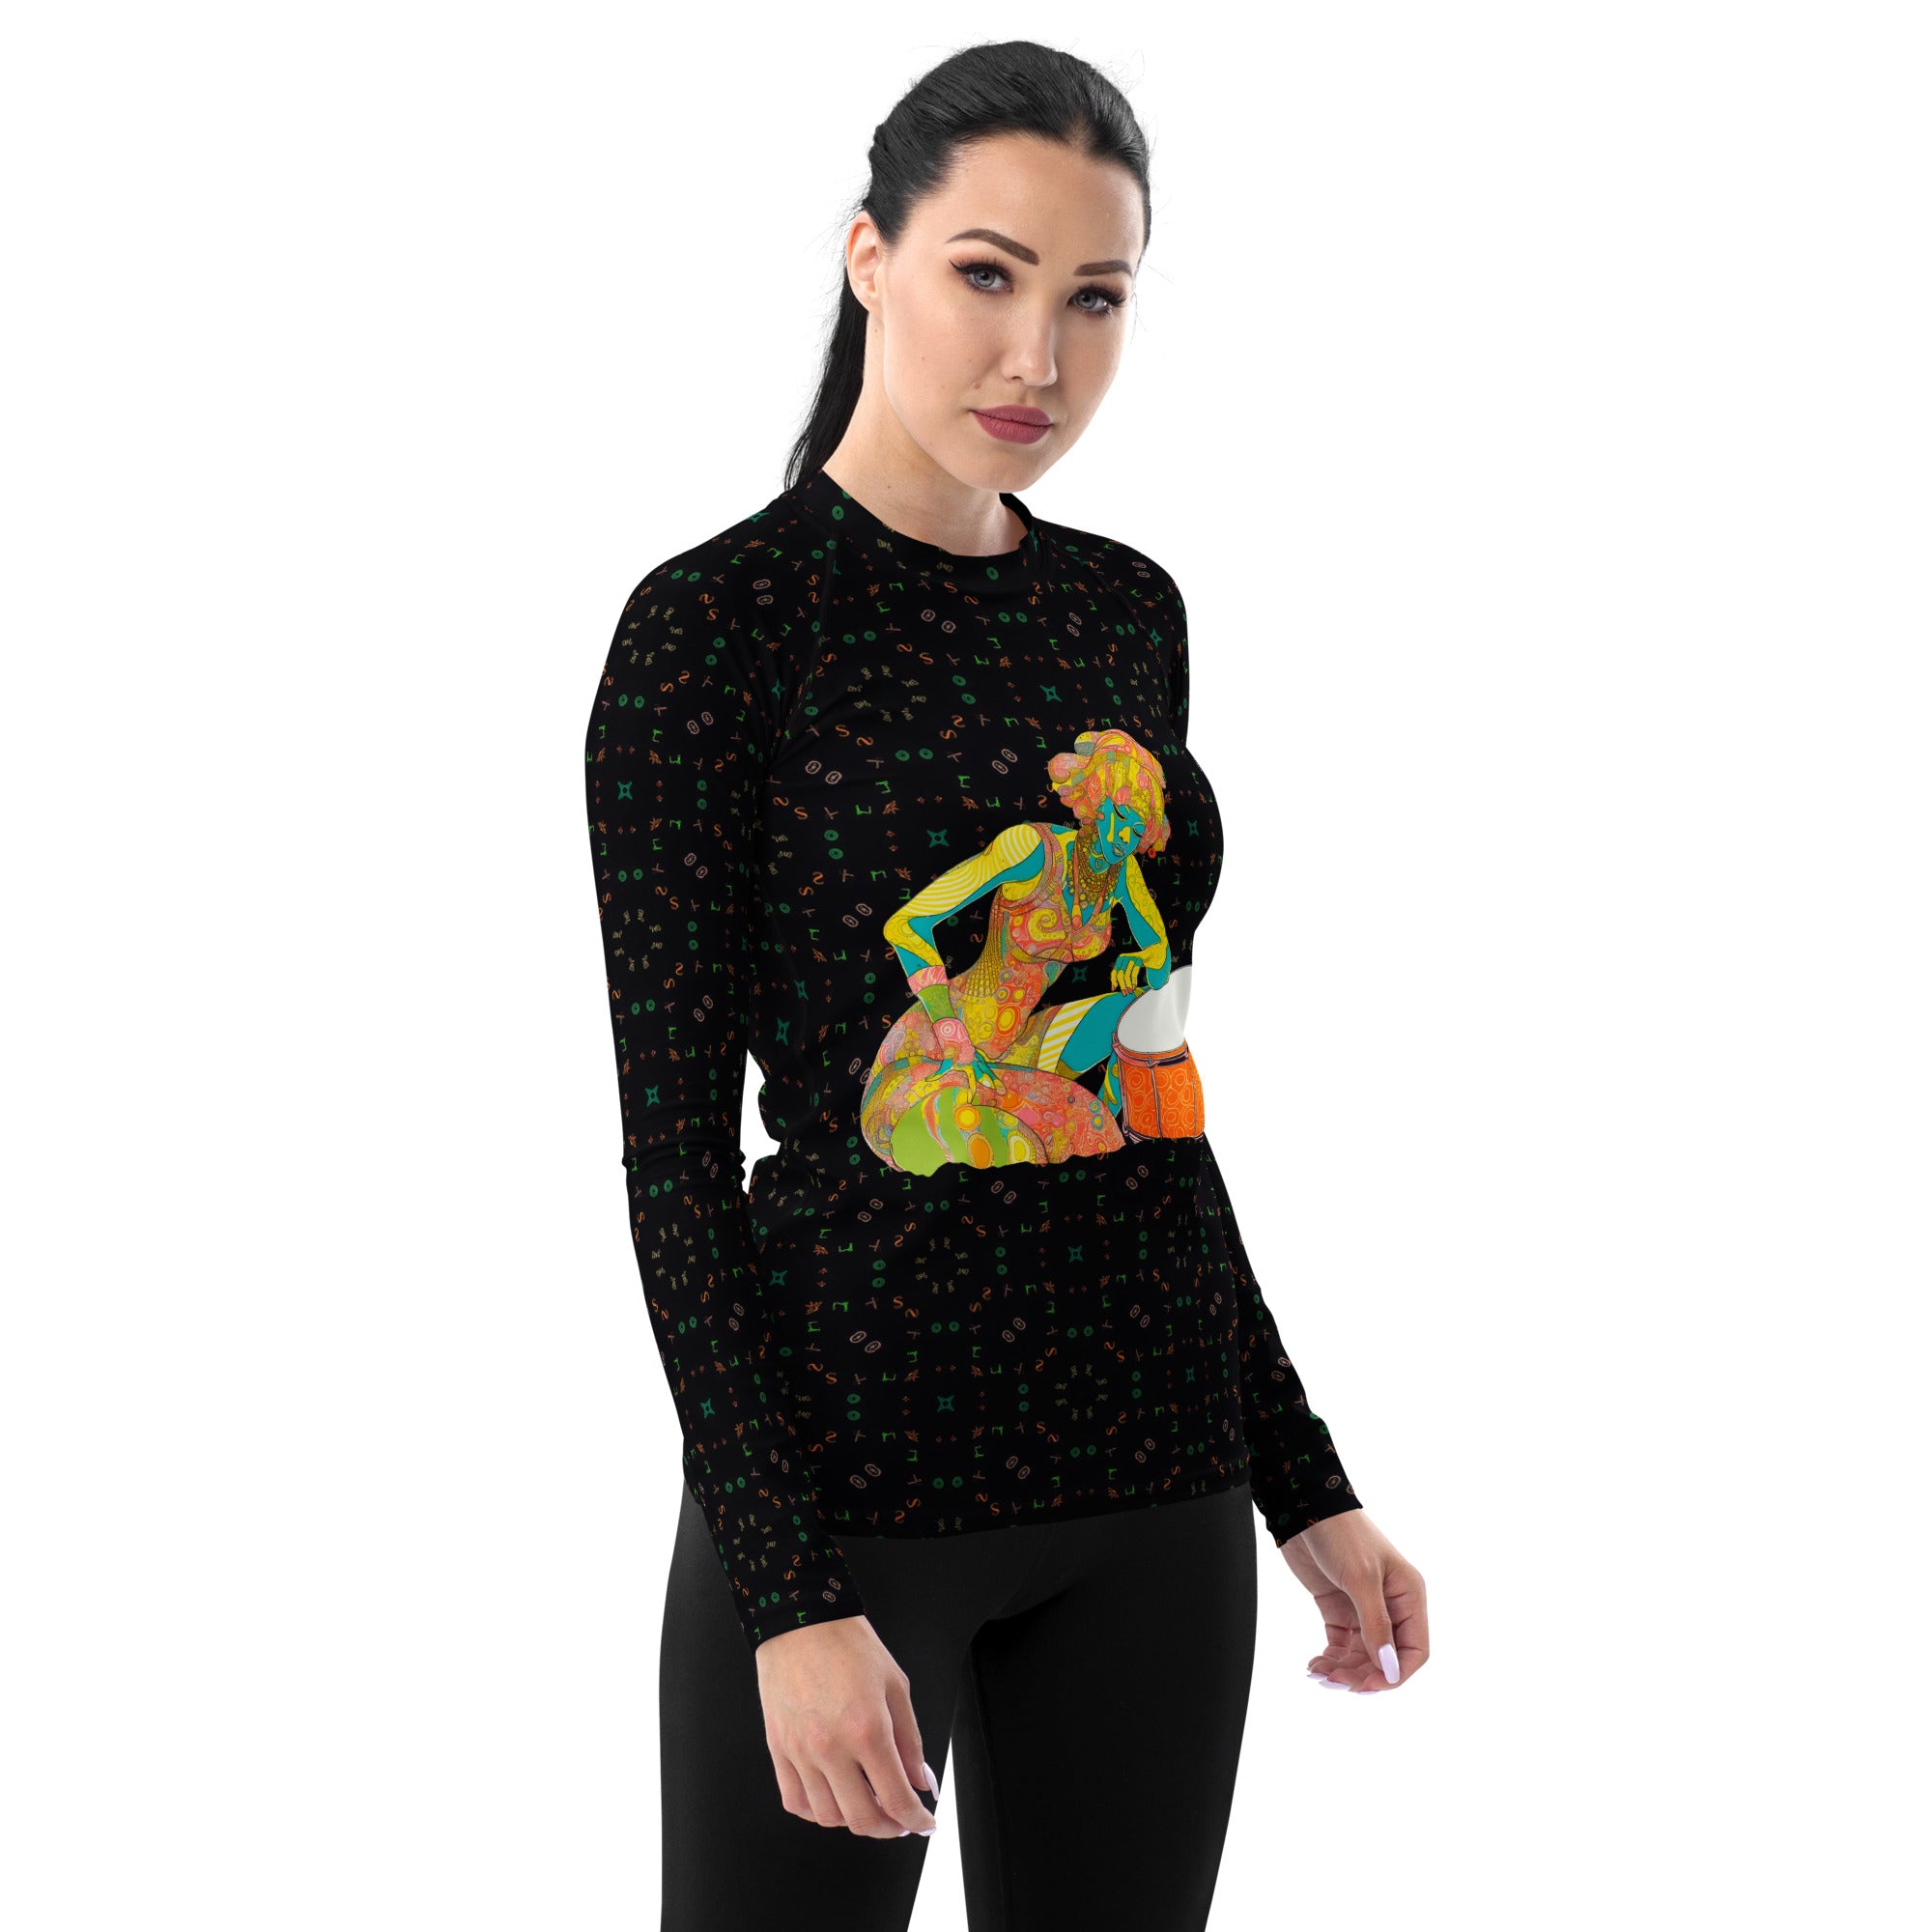 Floral Fantasy Printed Women's Rash Guard on a surfer at the beach.